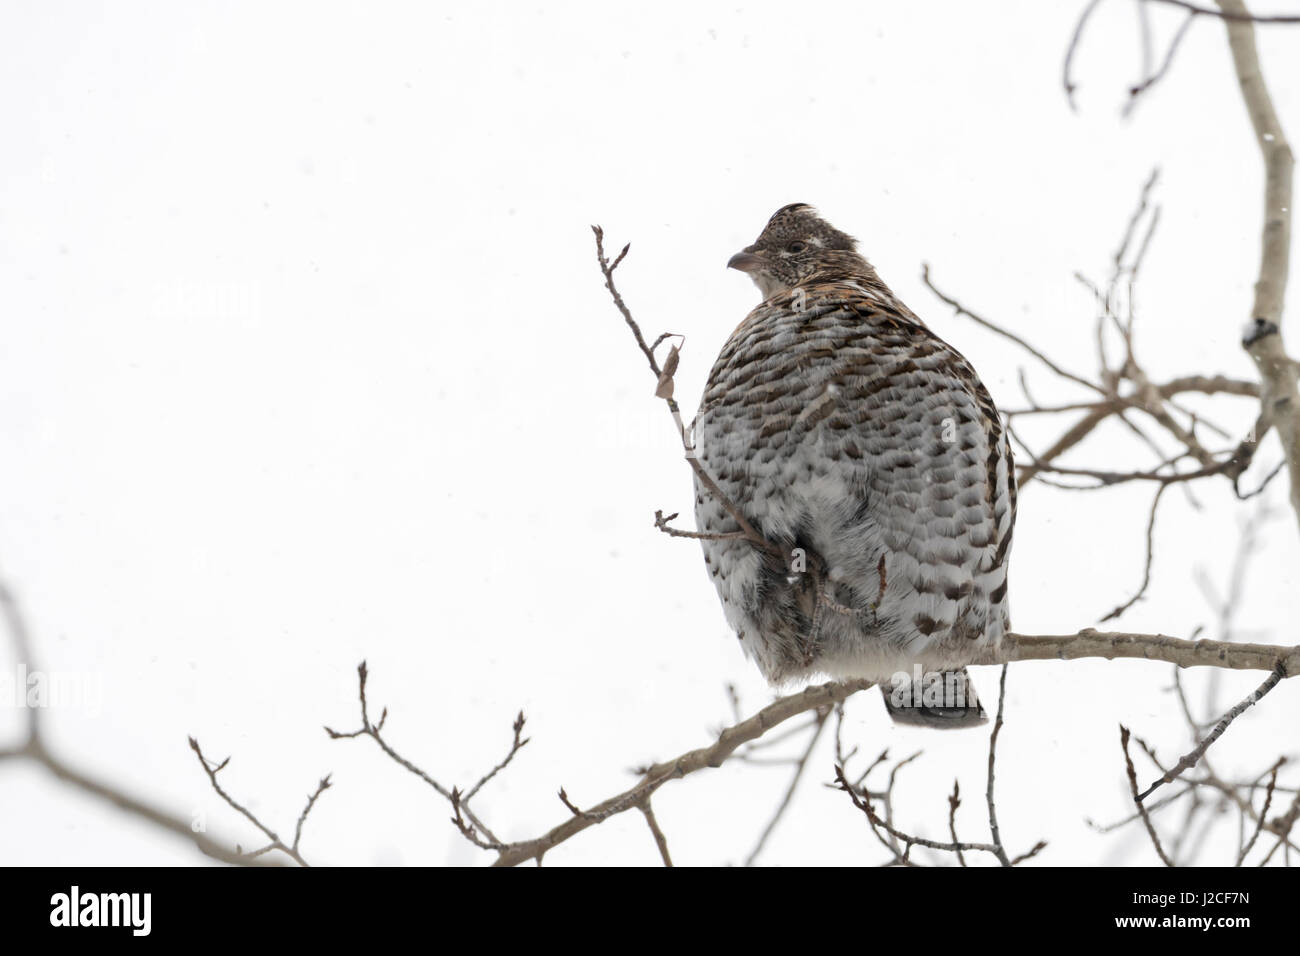 Ruffed grouse / Kragenhuhn ( Bonasa umbellus ) in winter, perched in a cottonwood tree, resting, sitting on a thin branch, Yellowstone area, Wyoming,  Stock Photo